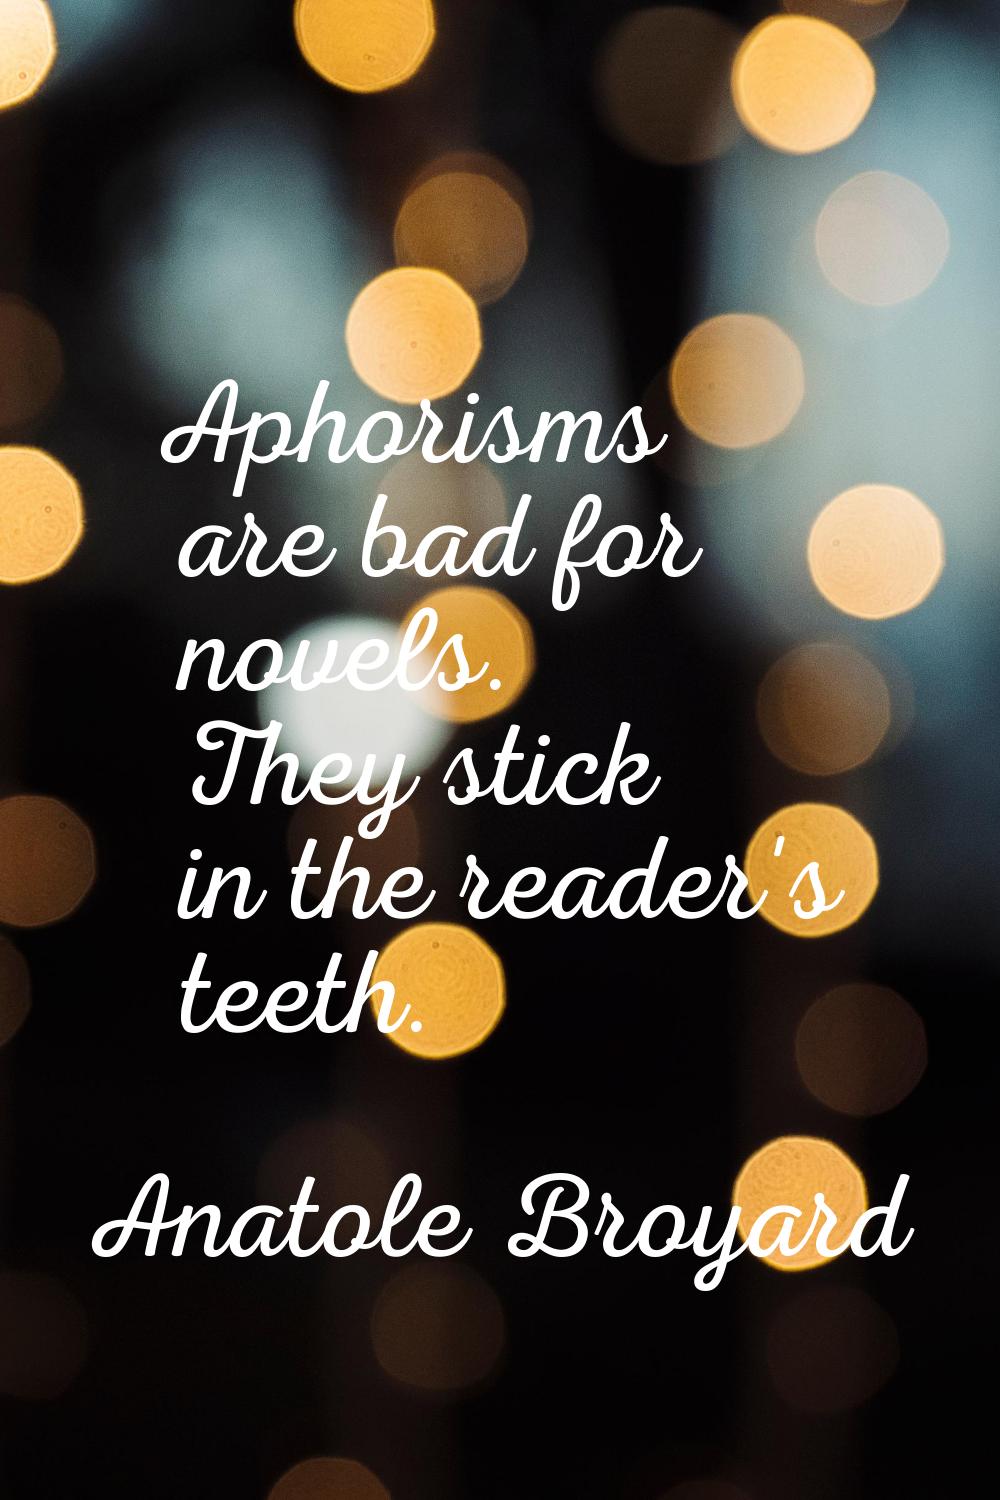 Aphorisms are bad for novels. They stick in the reader's teeth.